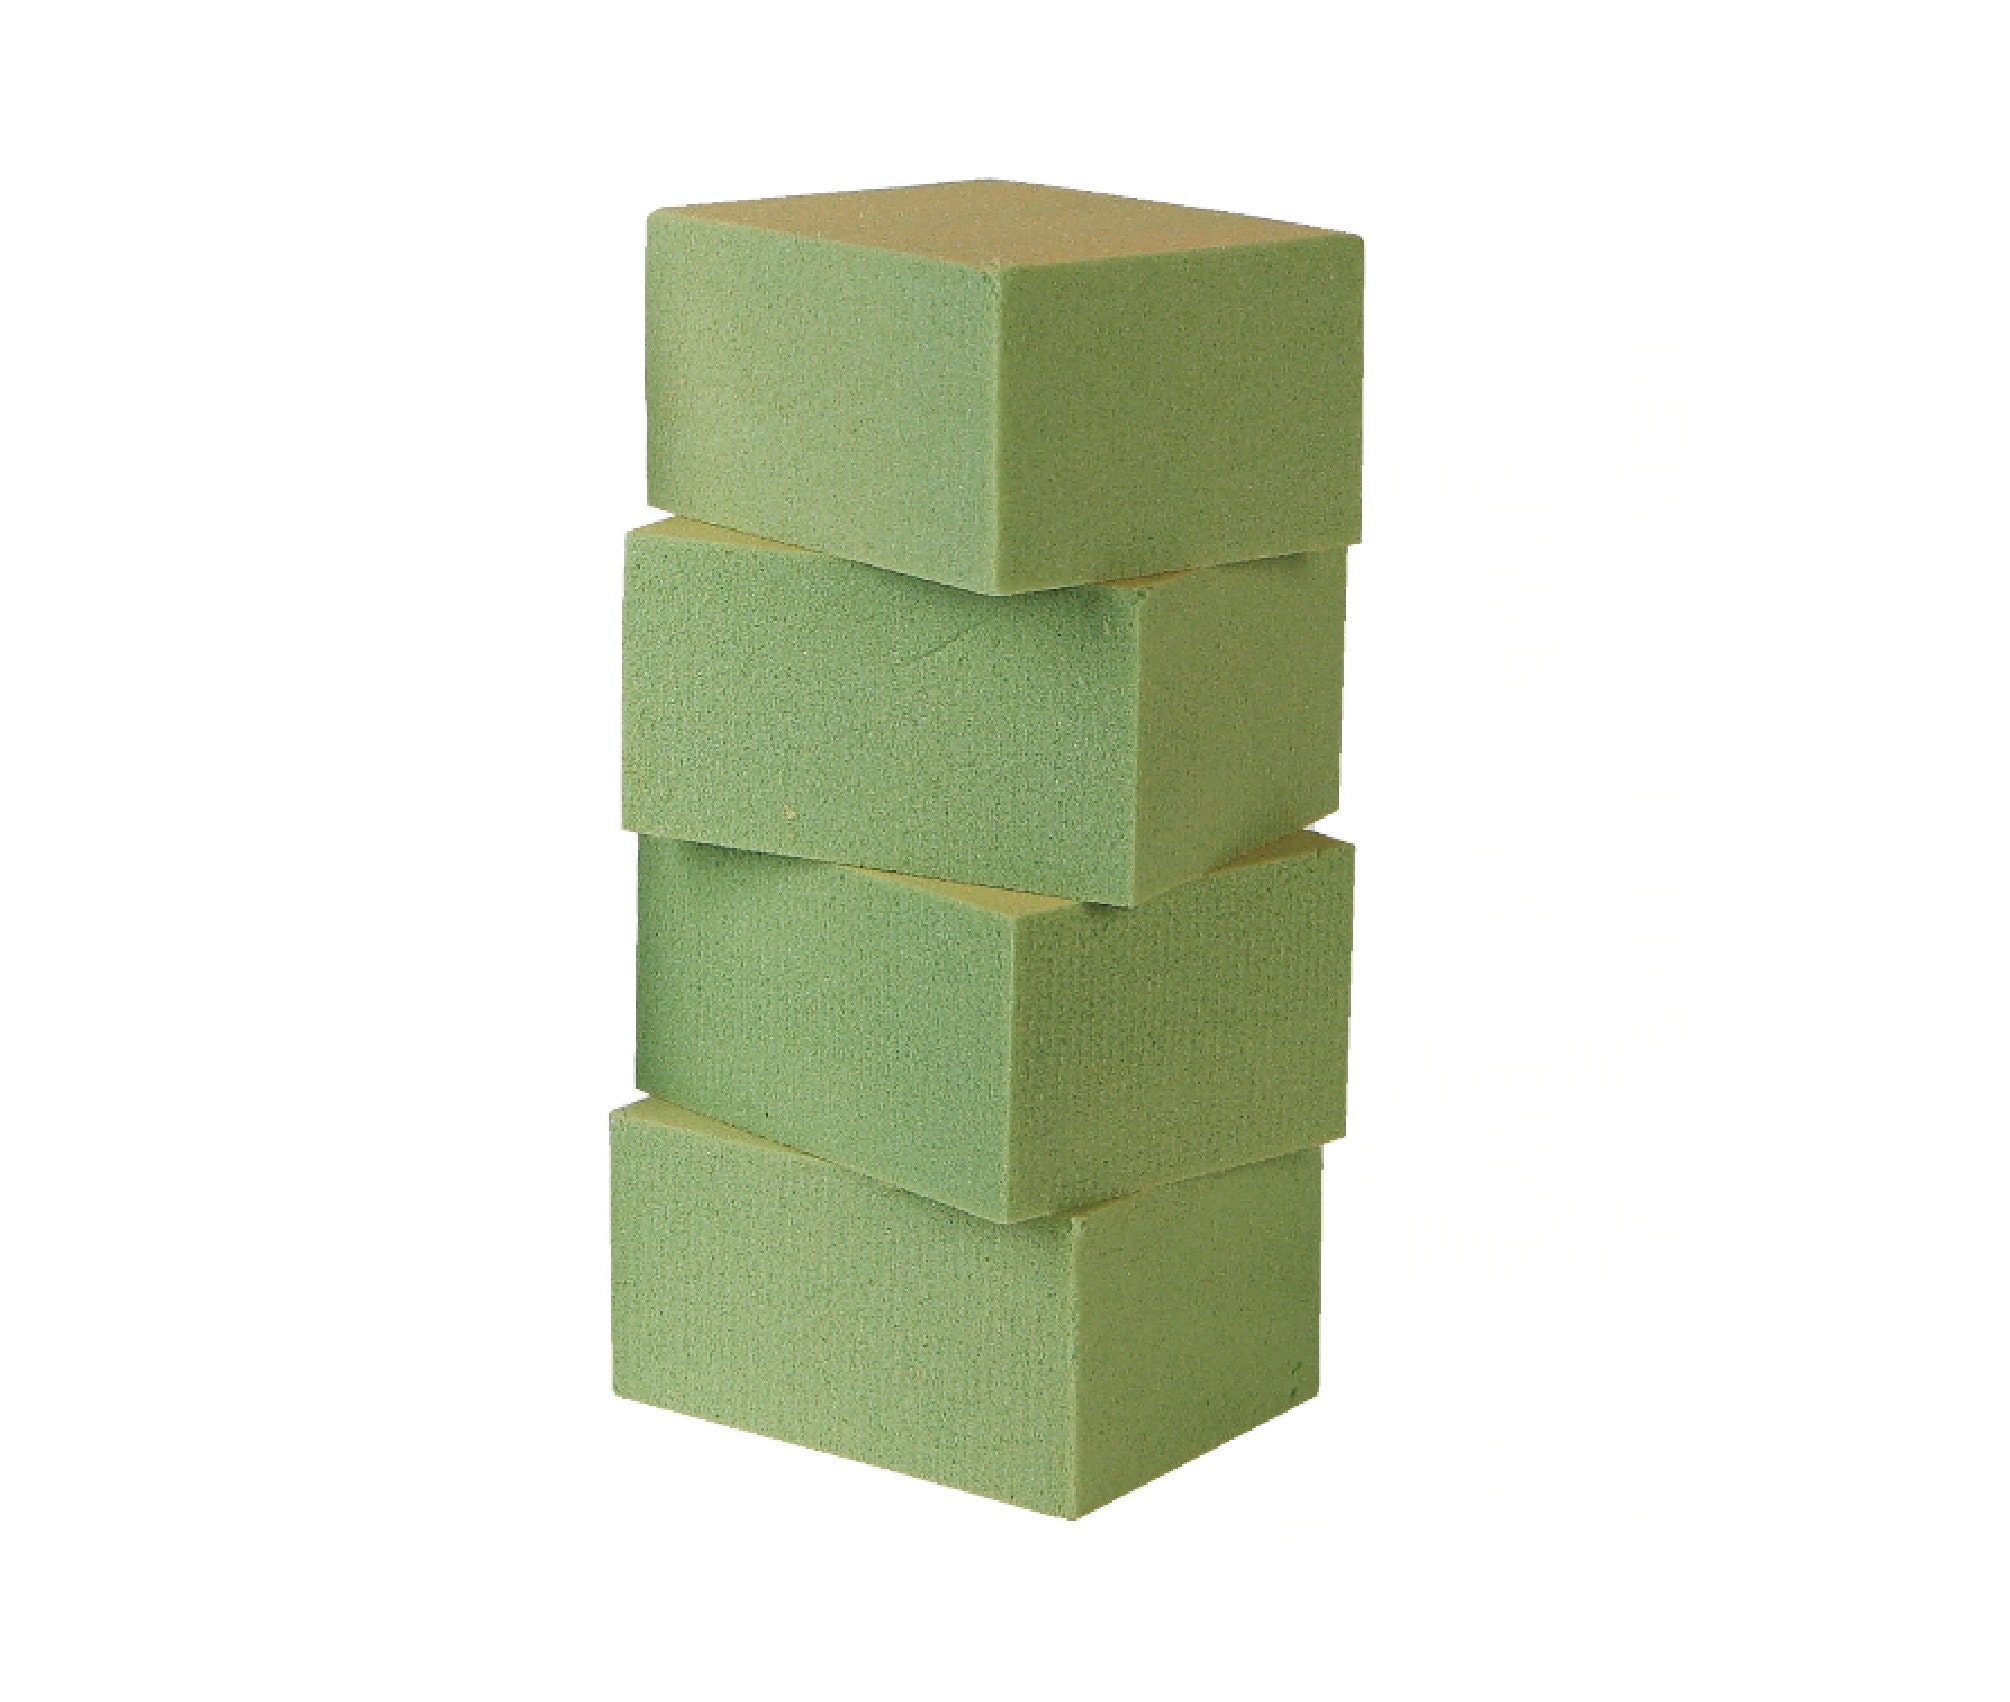 Floral Foam, 4 Blocks, 1.5 X 2.6 X 3.3 Inches, Works Great With